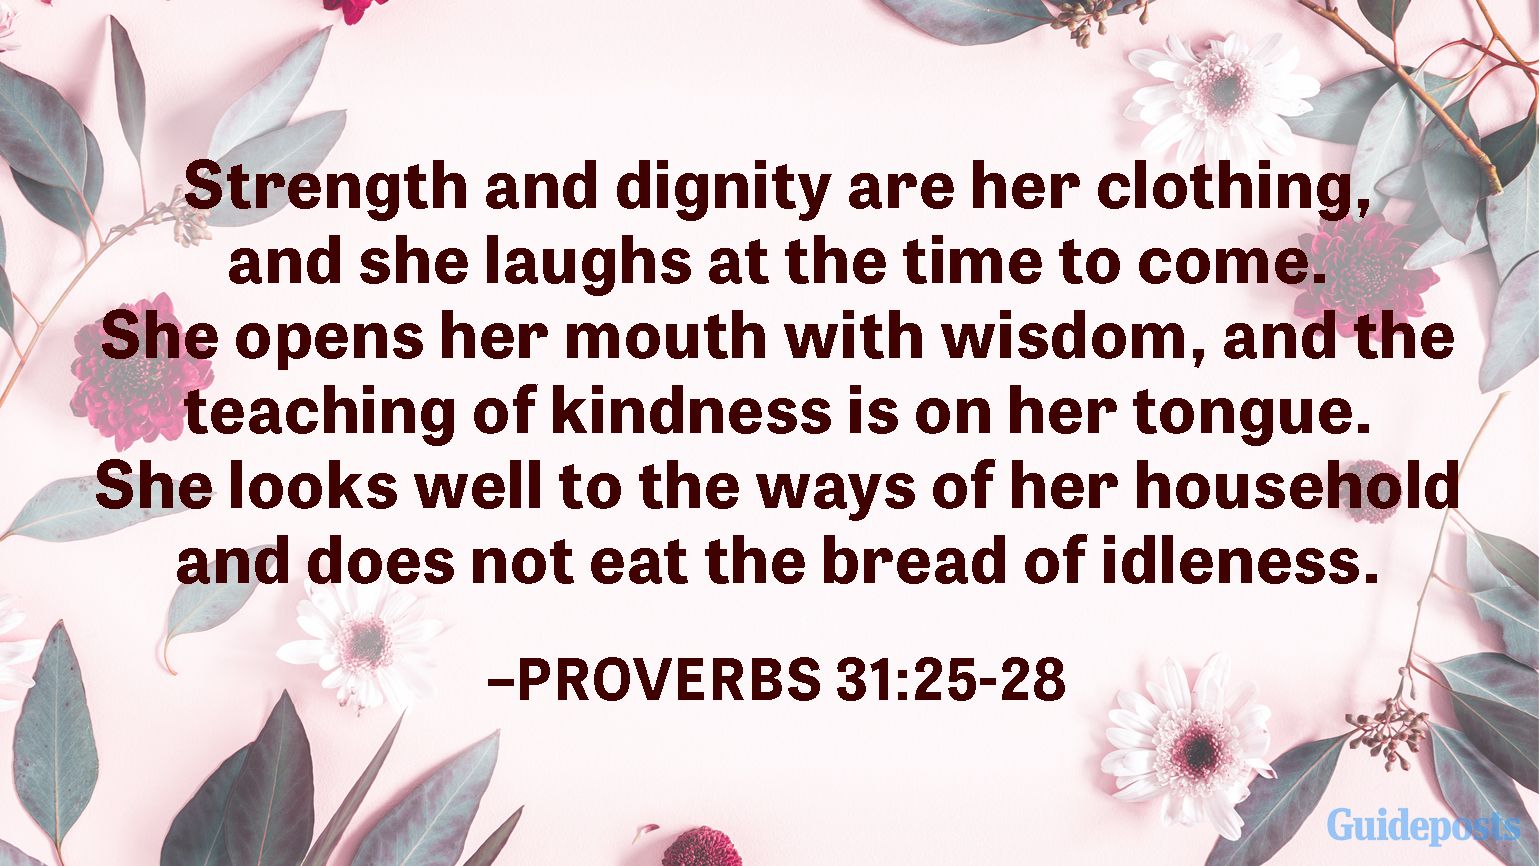 Strength and dignity are her clothing, and she laughs at the time to come. She opens her mouth with wisdom, and the teaching of kindness is on her tongue. She looks well to the ways of her household and does not eat the bread of idleness.  —Proverbs 31:25-28